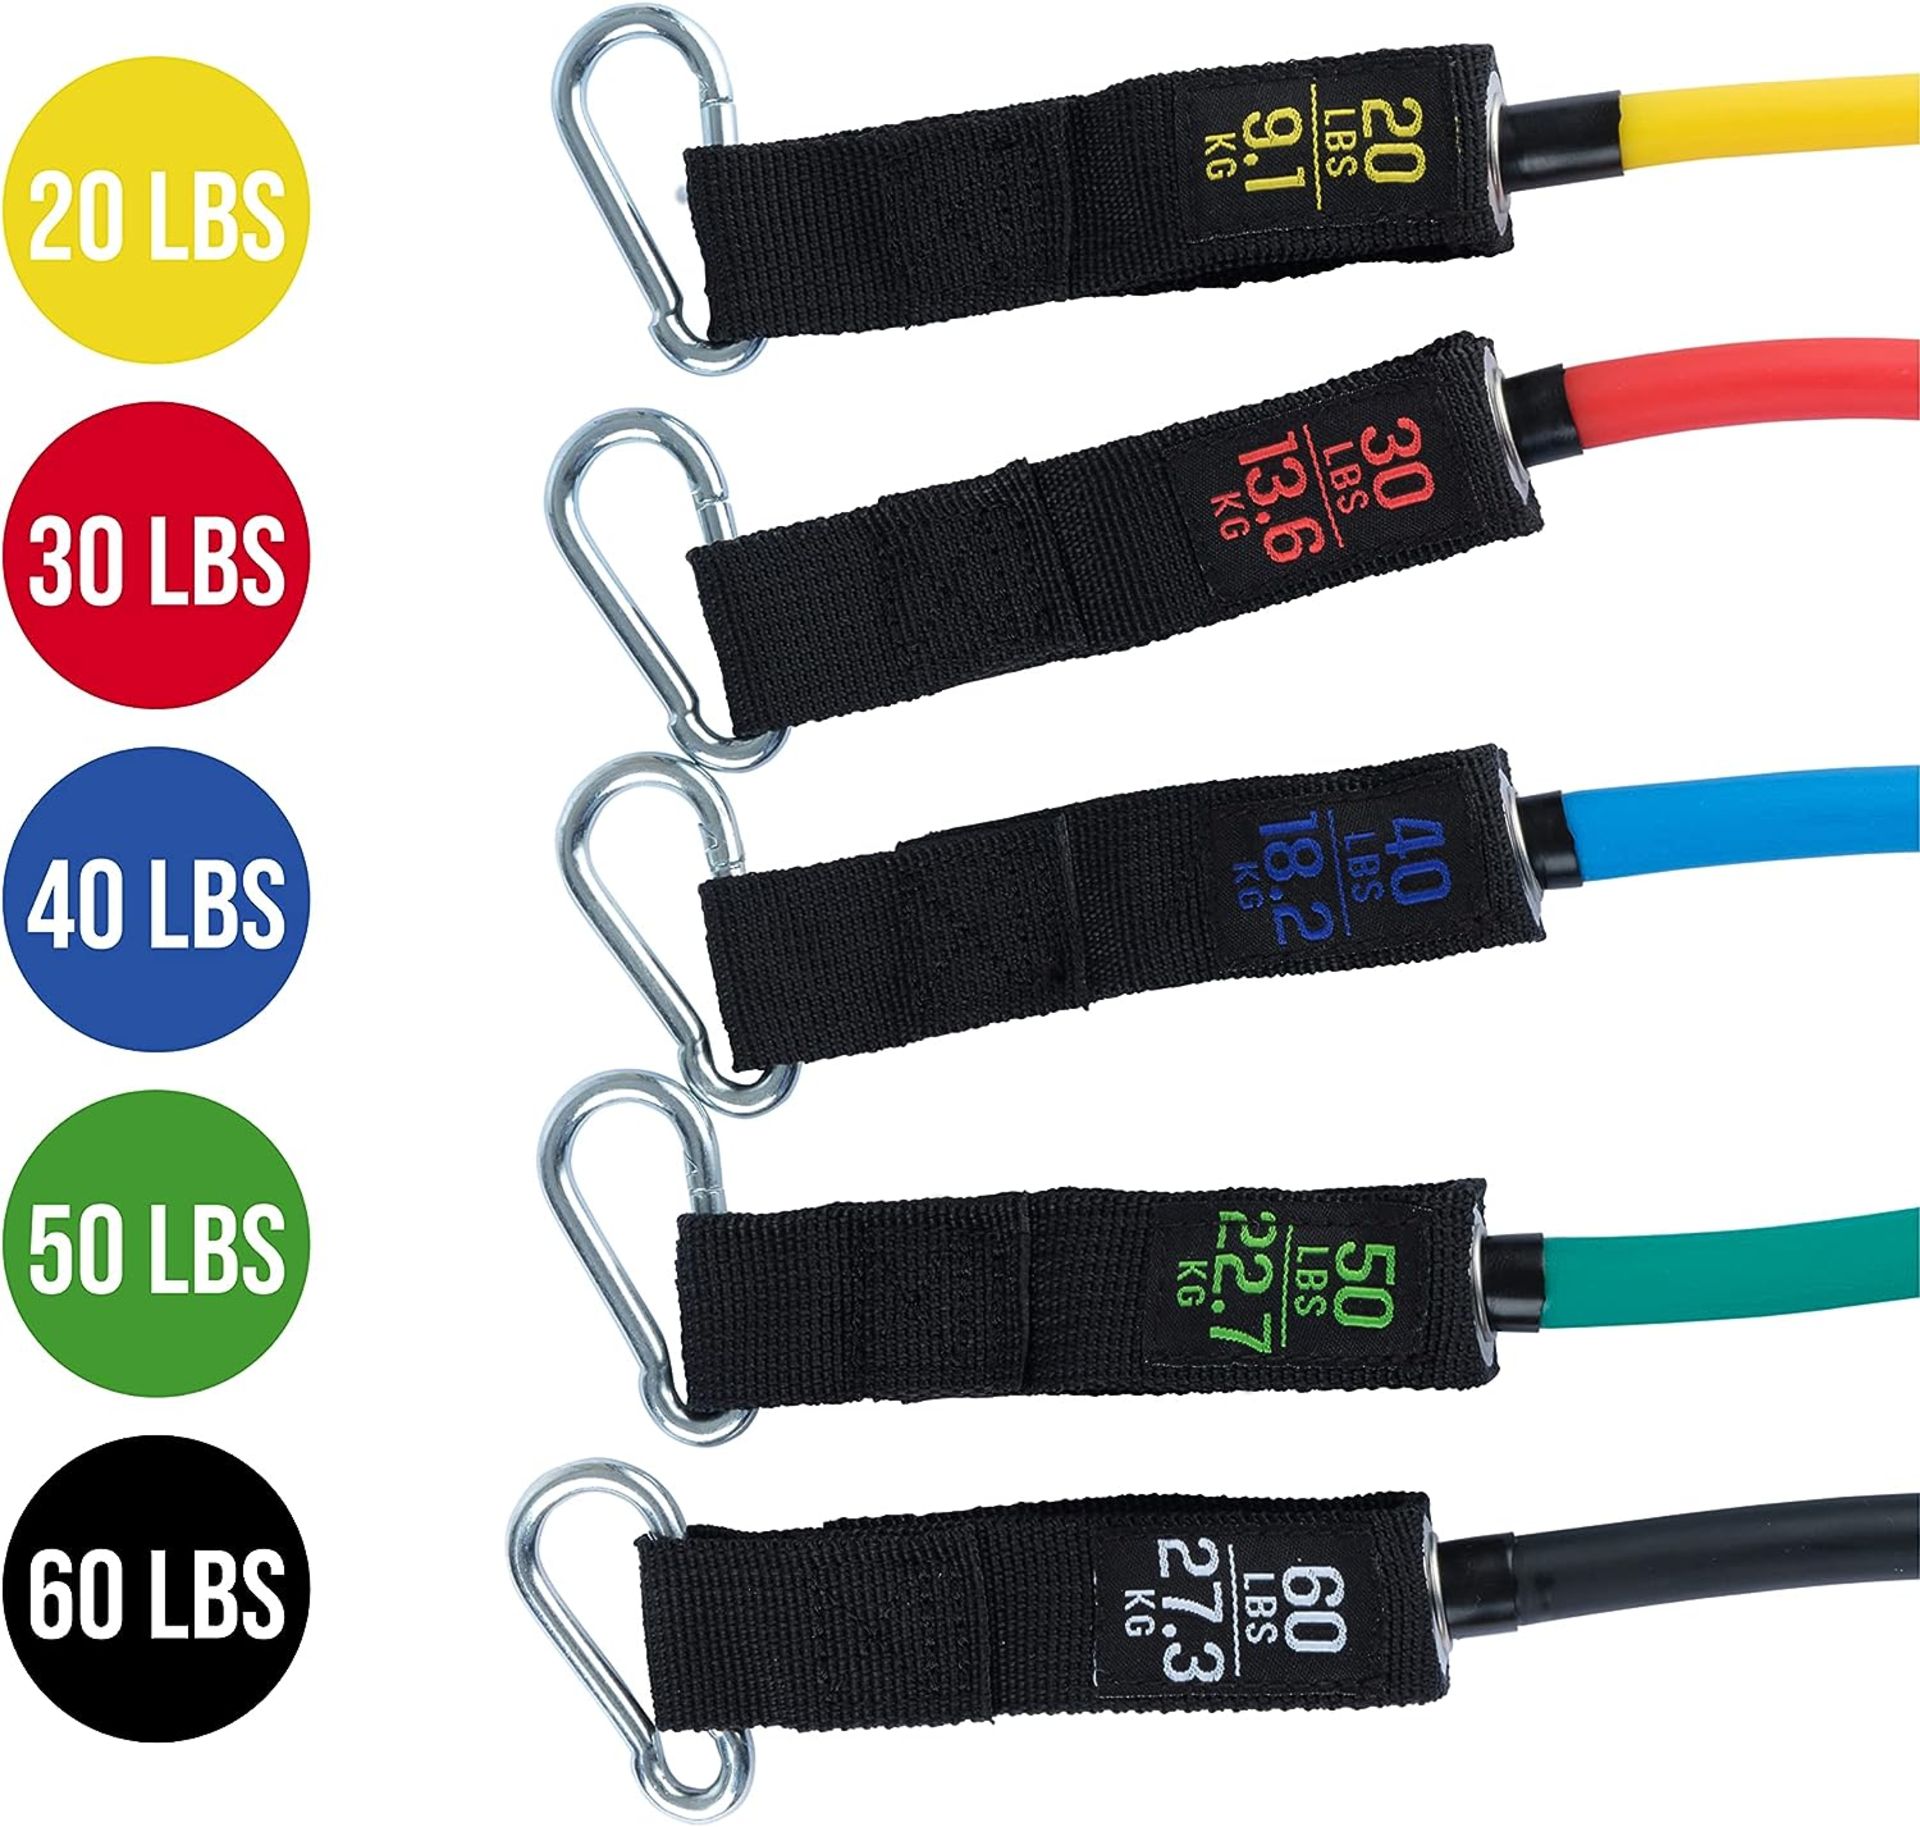 10 x NEW Mode33 Resistance Bands Set 100lbs â€“ Premium Latex Exercise Bands - RRP Â£169.90 ! - Image 4 of 7